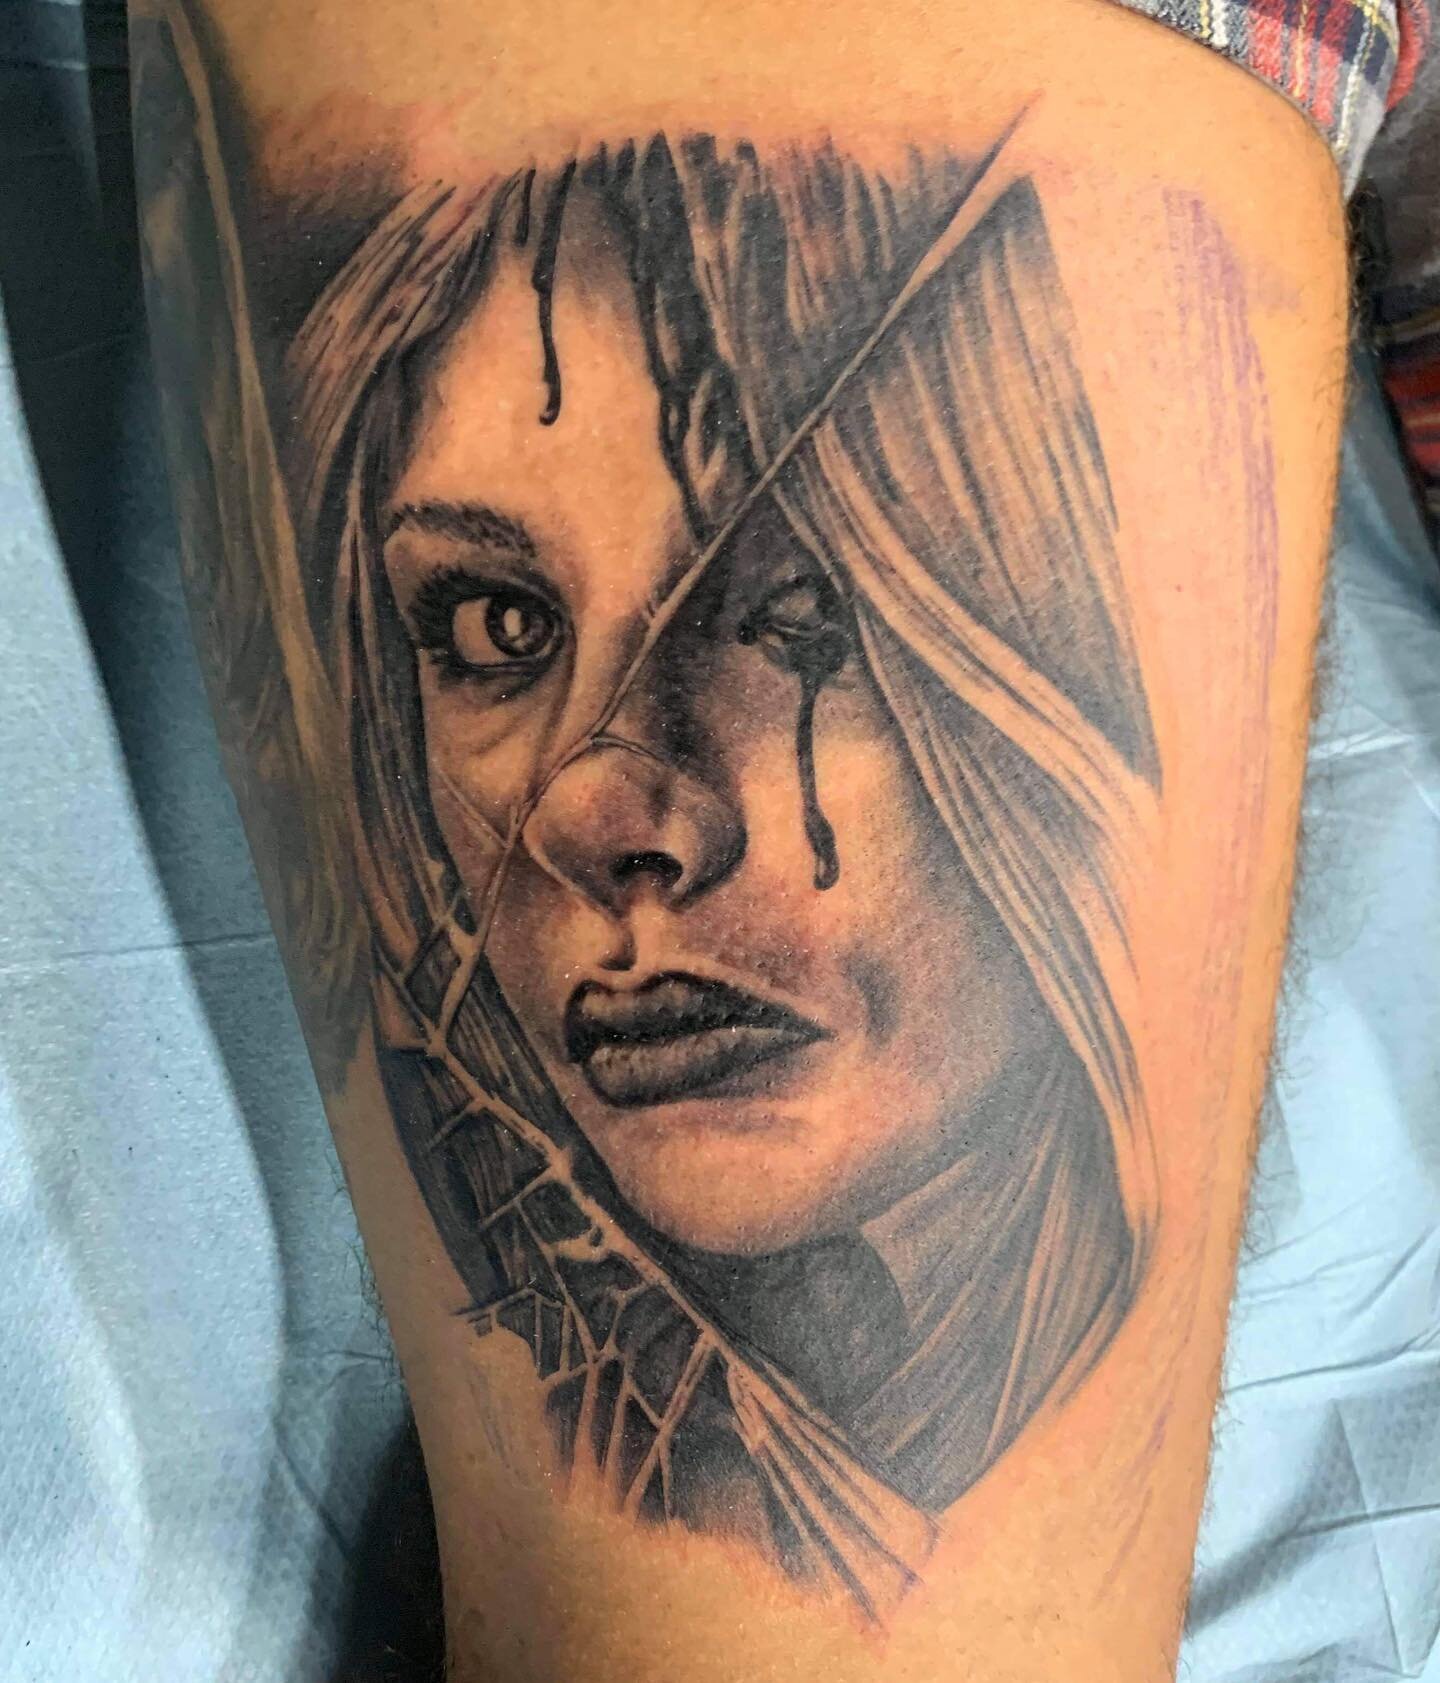 What&rsquo;s your favorite movie? Tell me in the comments ⬇️ Had blast doing this Carrie portrait. Would love to do more like this at @lightningrevivaltattoo message here to set up an appointment:: email: mattbooking@lightningrevival.com 
⚡️ 
Proud @